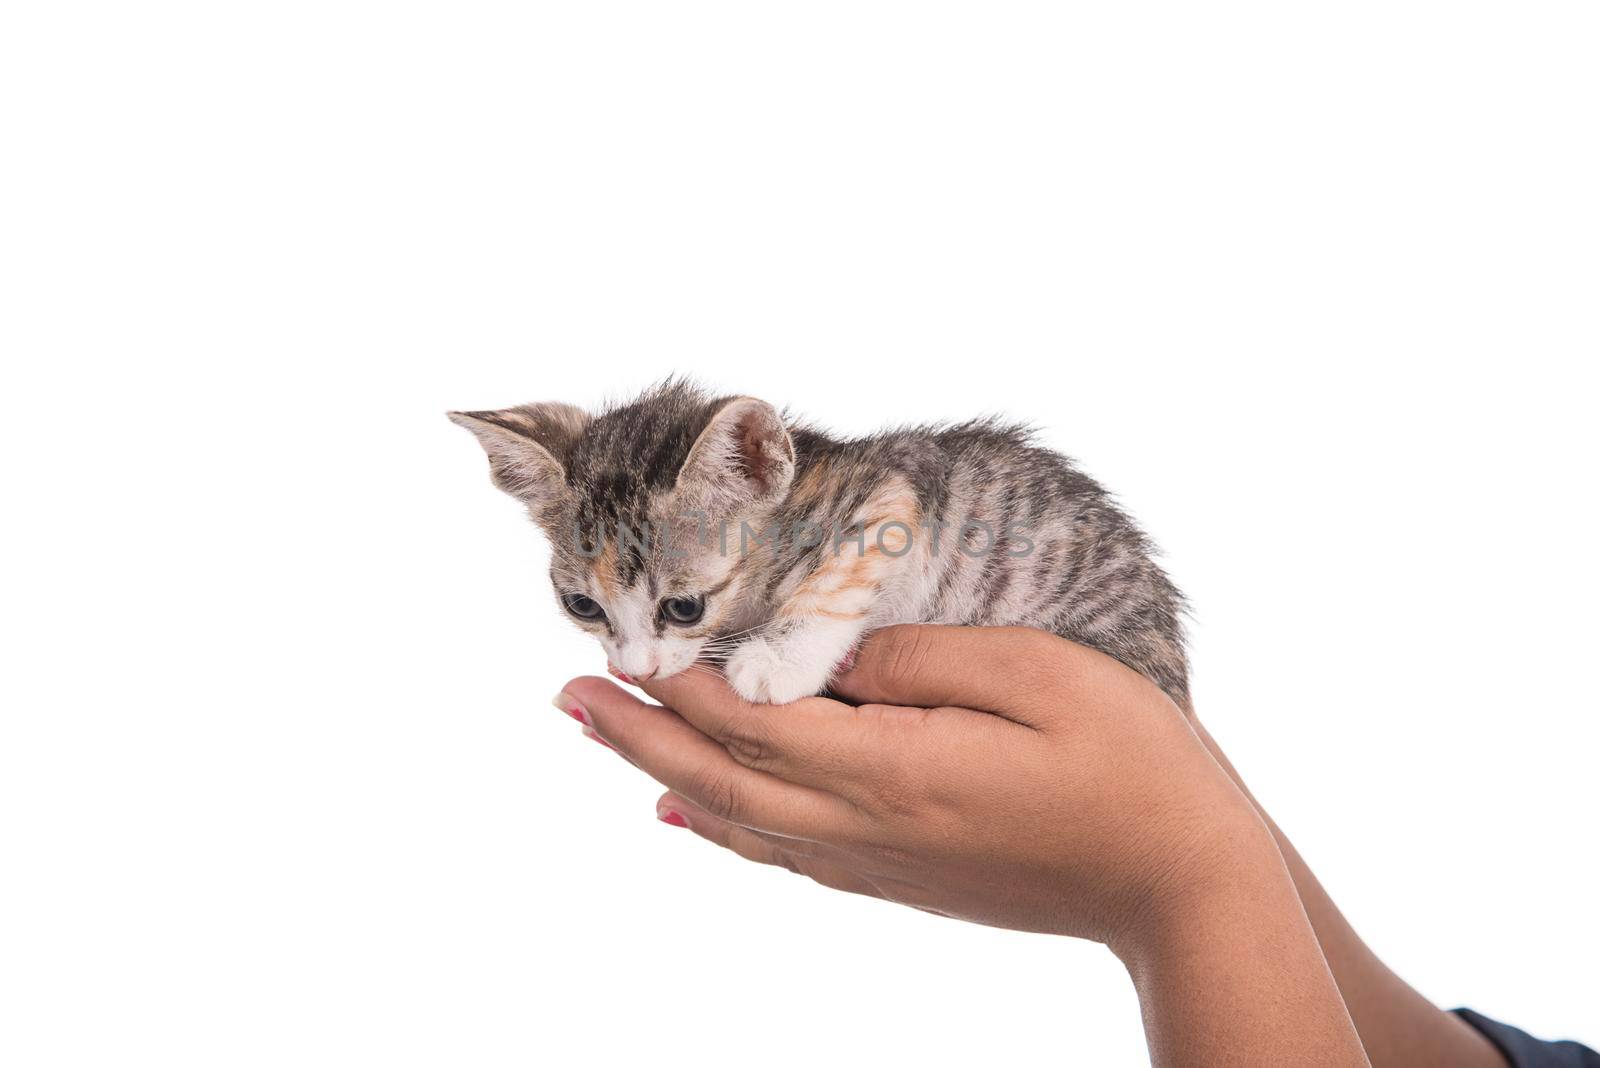 Small kitten in human hand on white background by DipakShelare